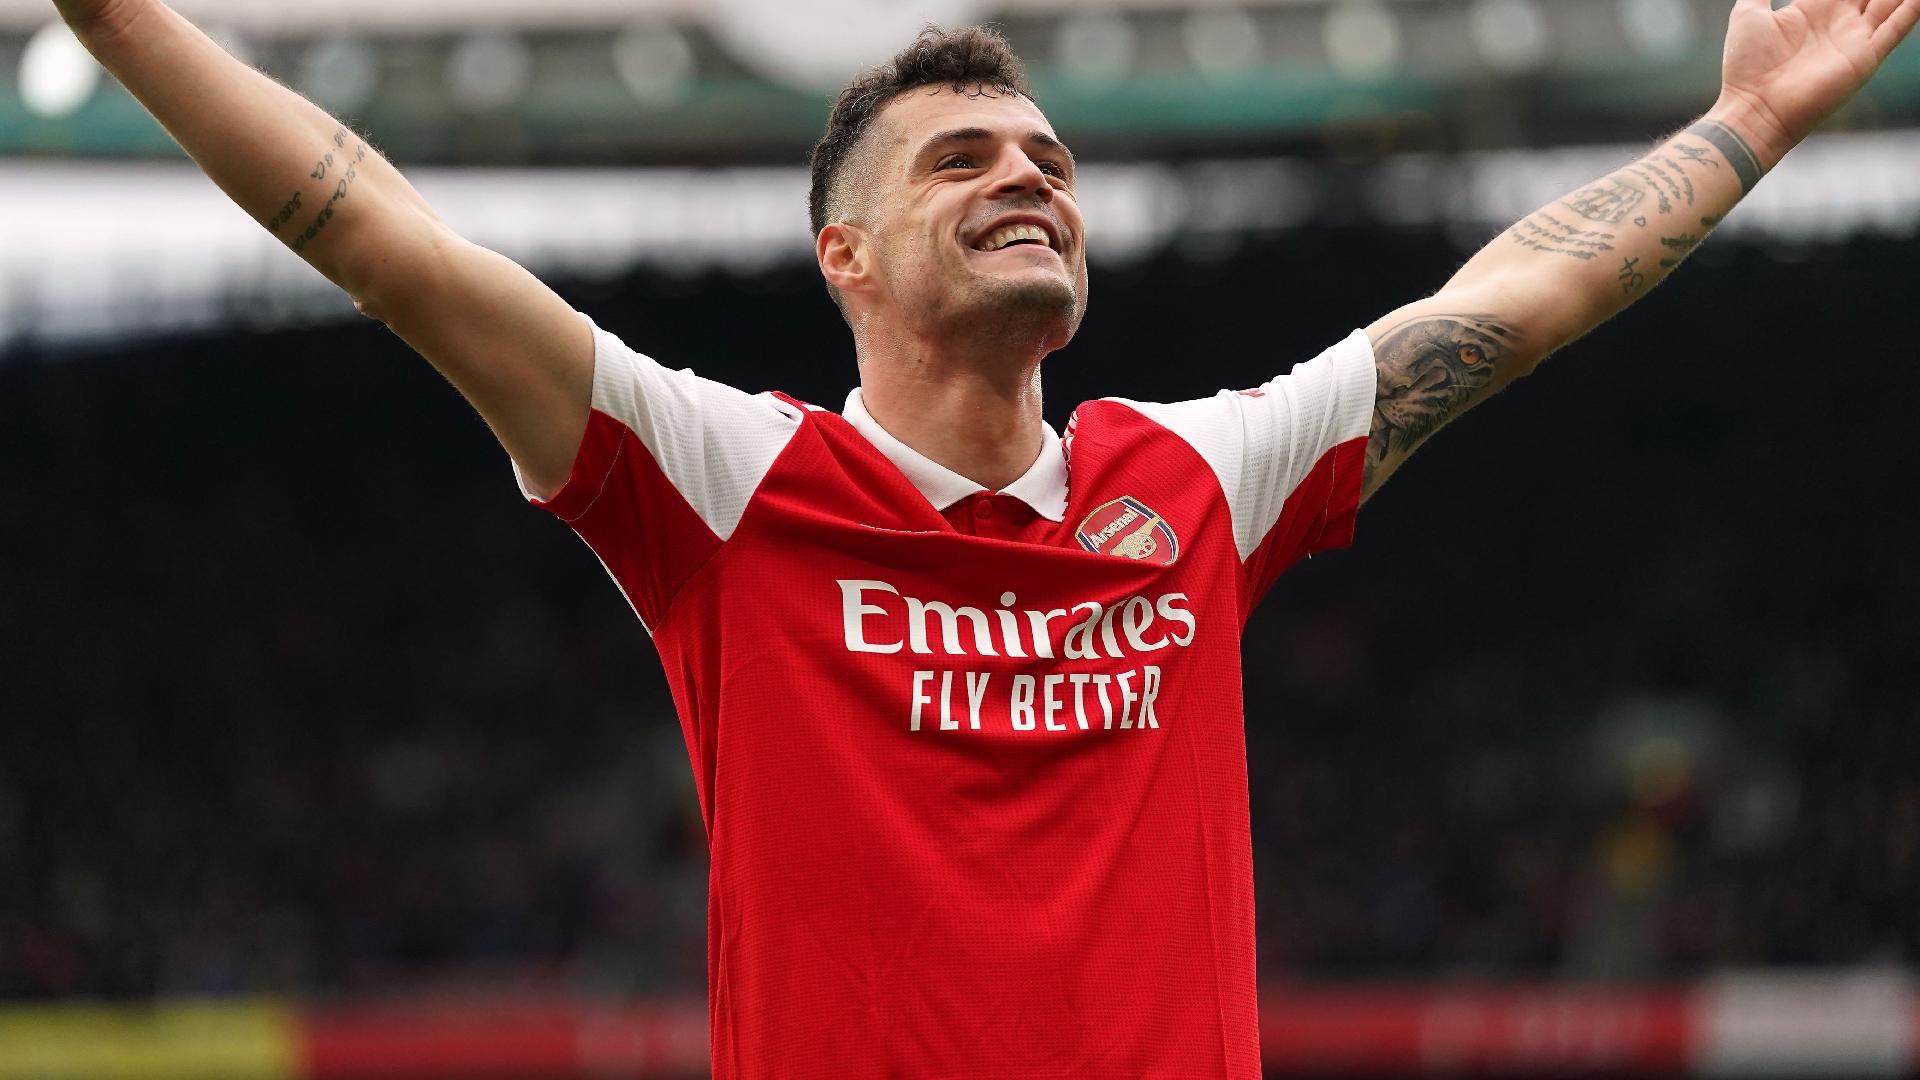 Granit Xhaka departs Arsenal on busy day at the Emirates | beIN SPORTS